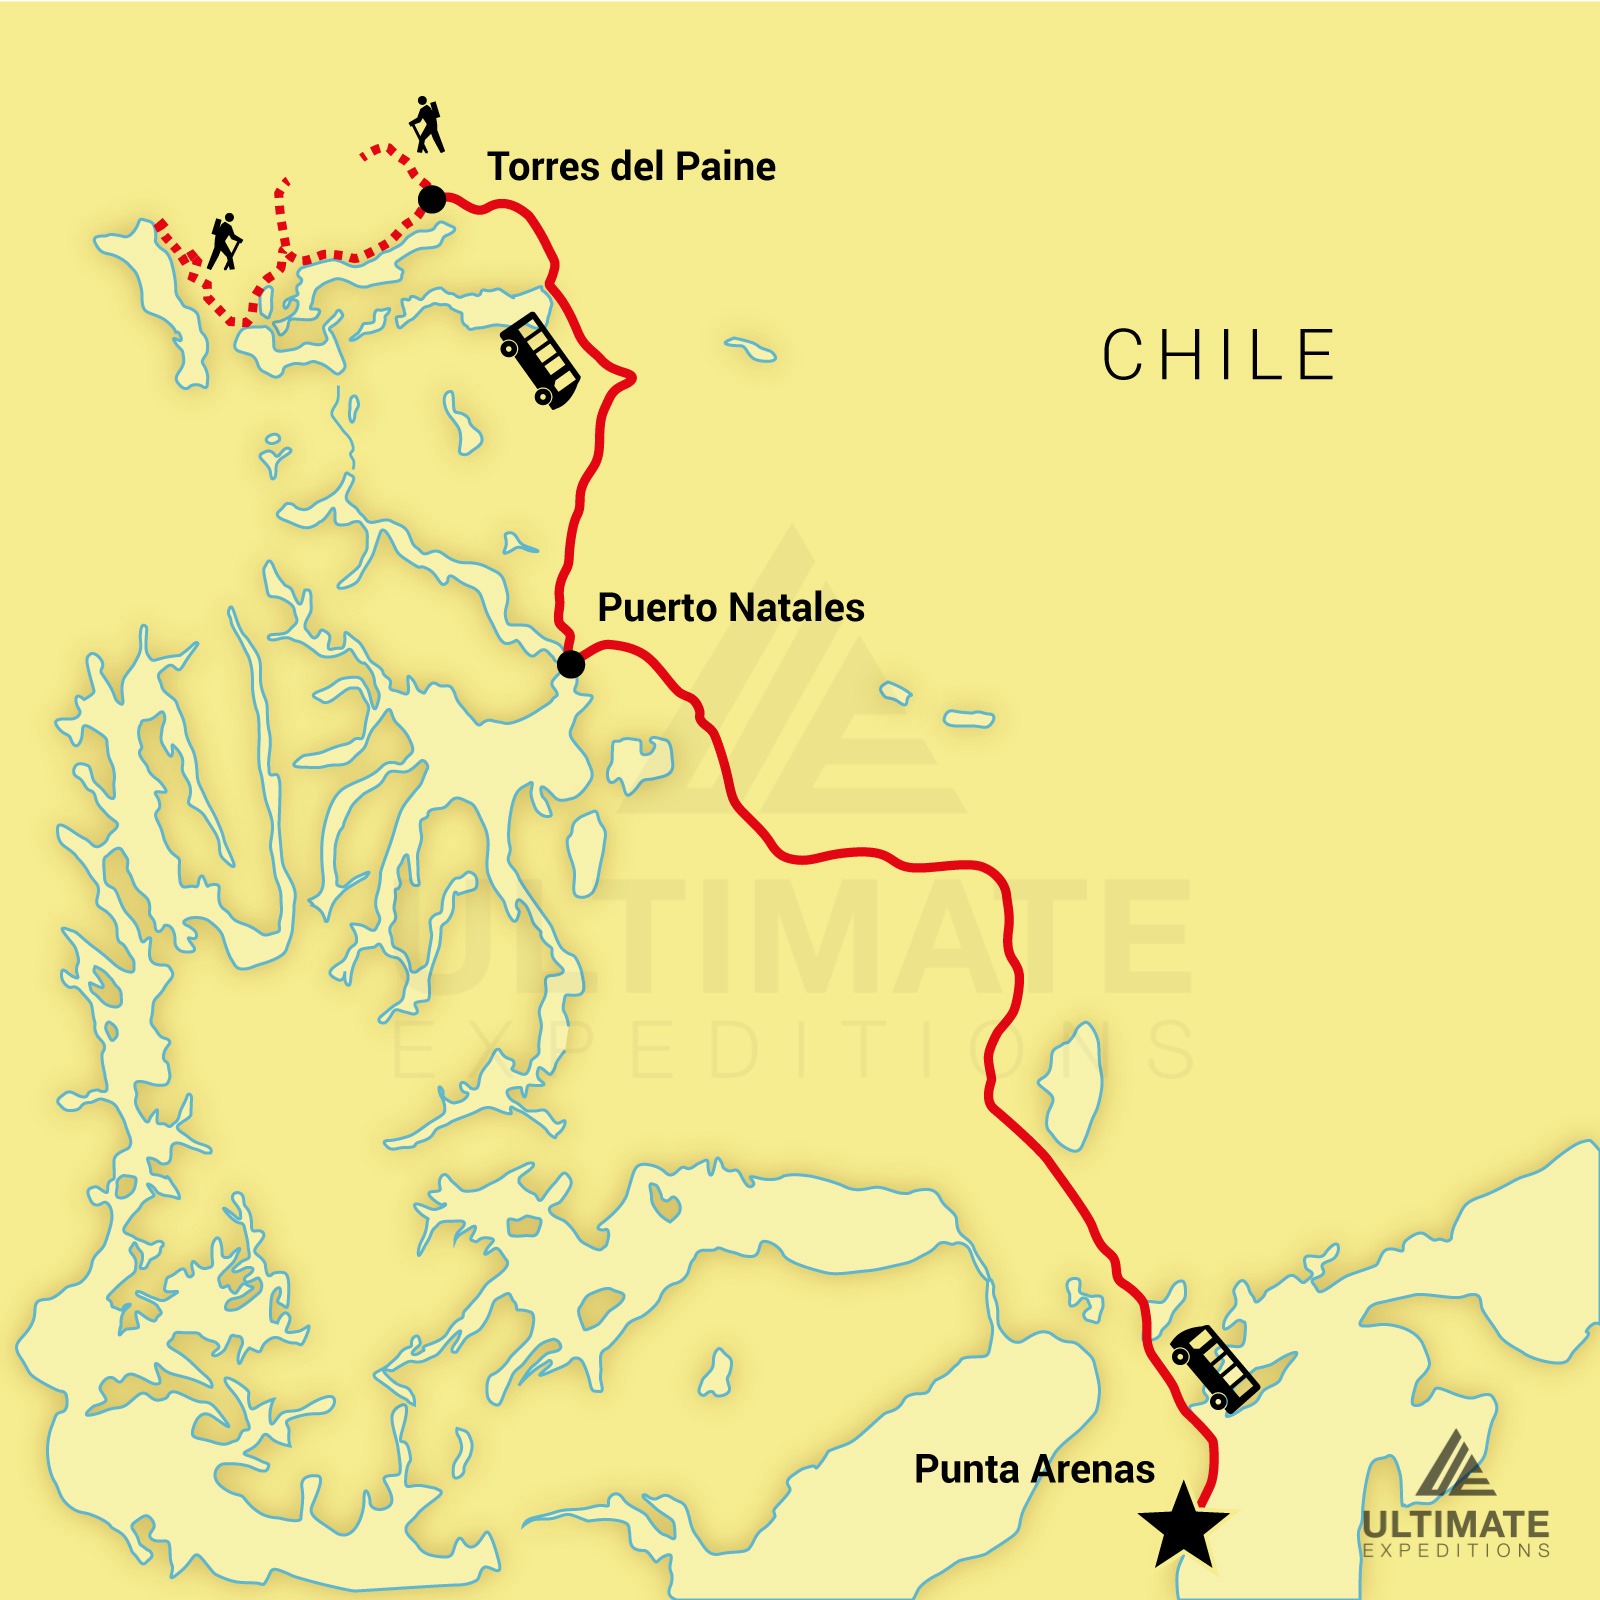 Totally Underrated: The “W” Trek in Patagonia